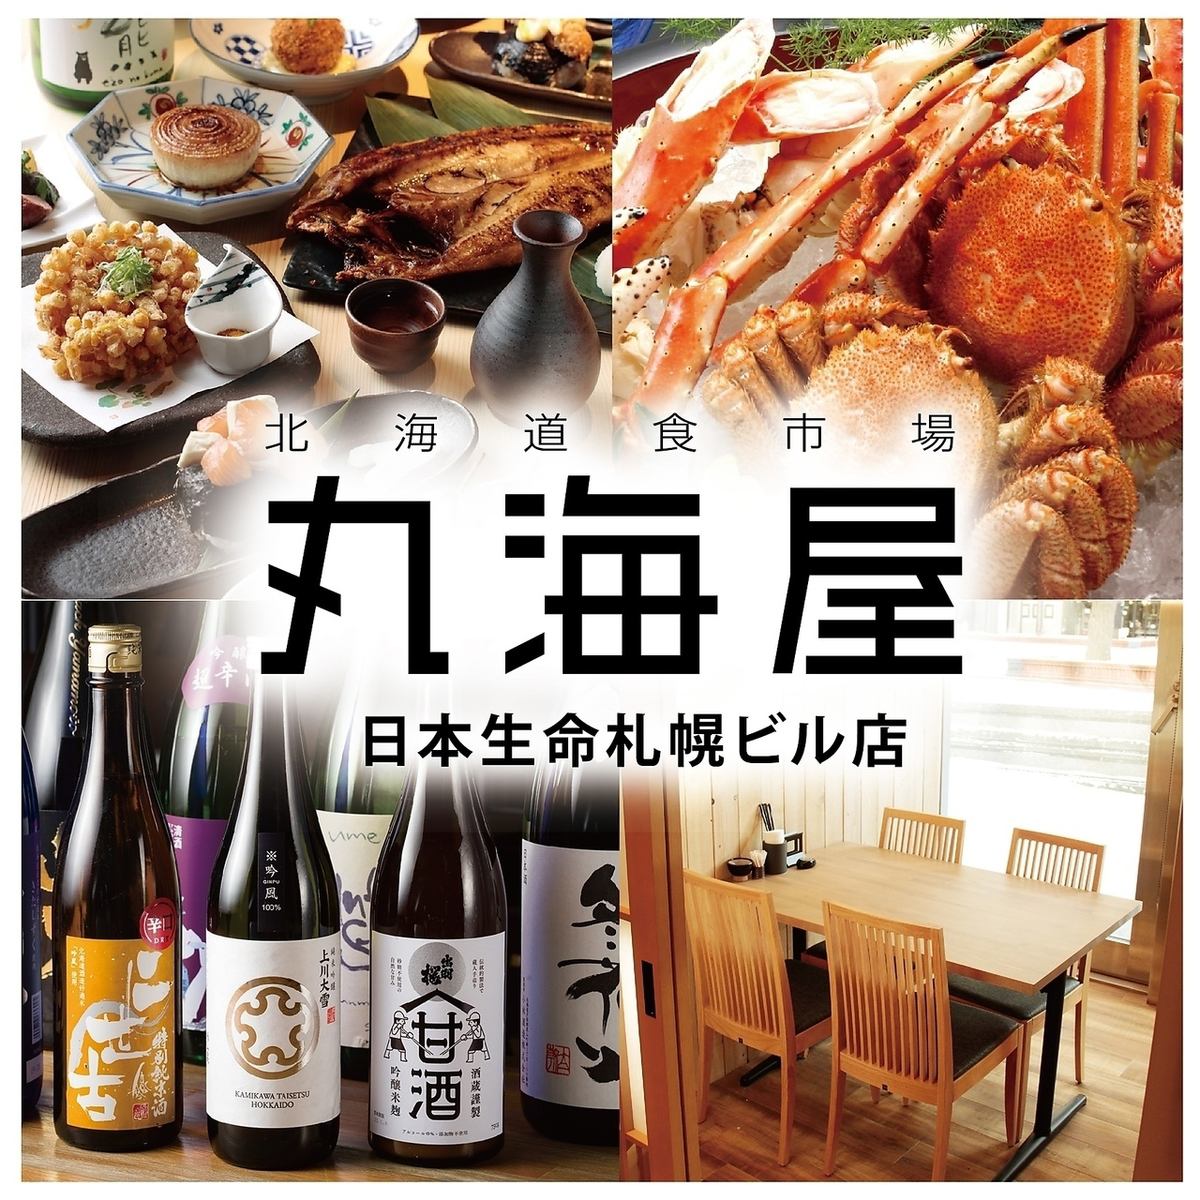 This is an izakaya near Sapporo Station where you can enjoy Hokkaido's delicacies.We also have private rooms in a spacious space.